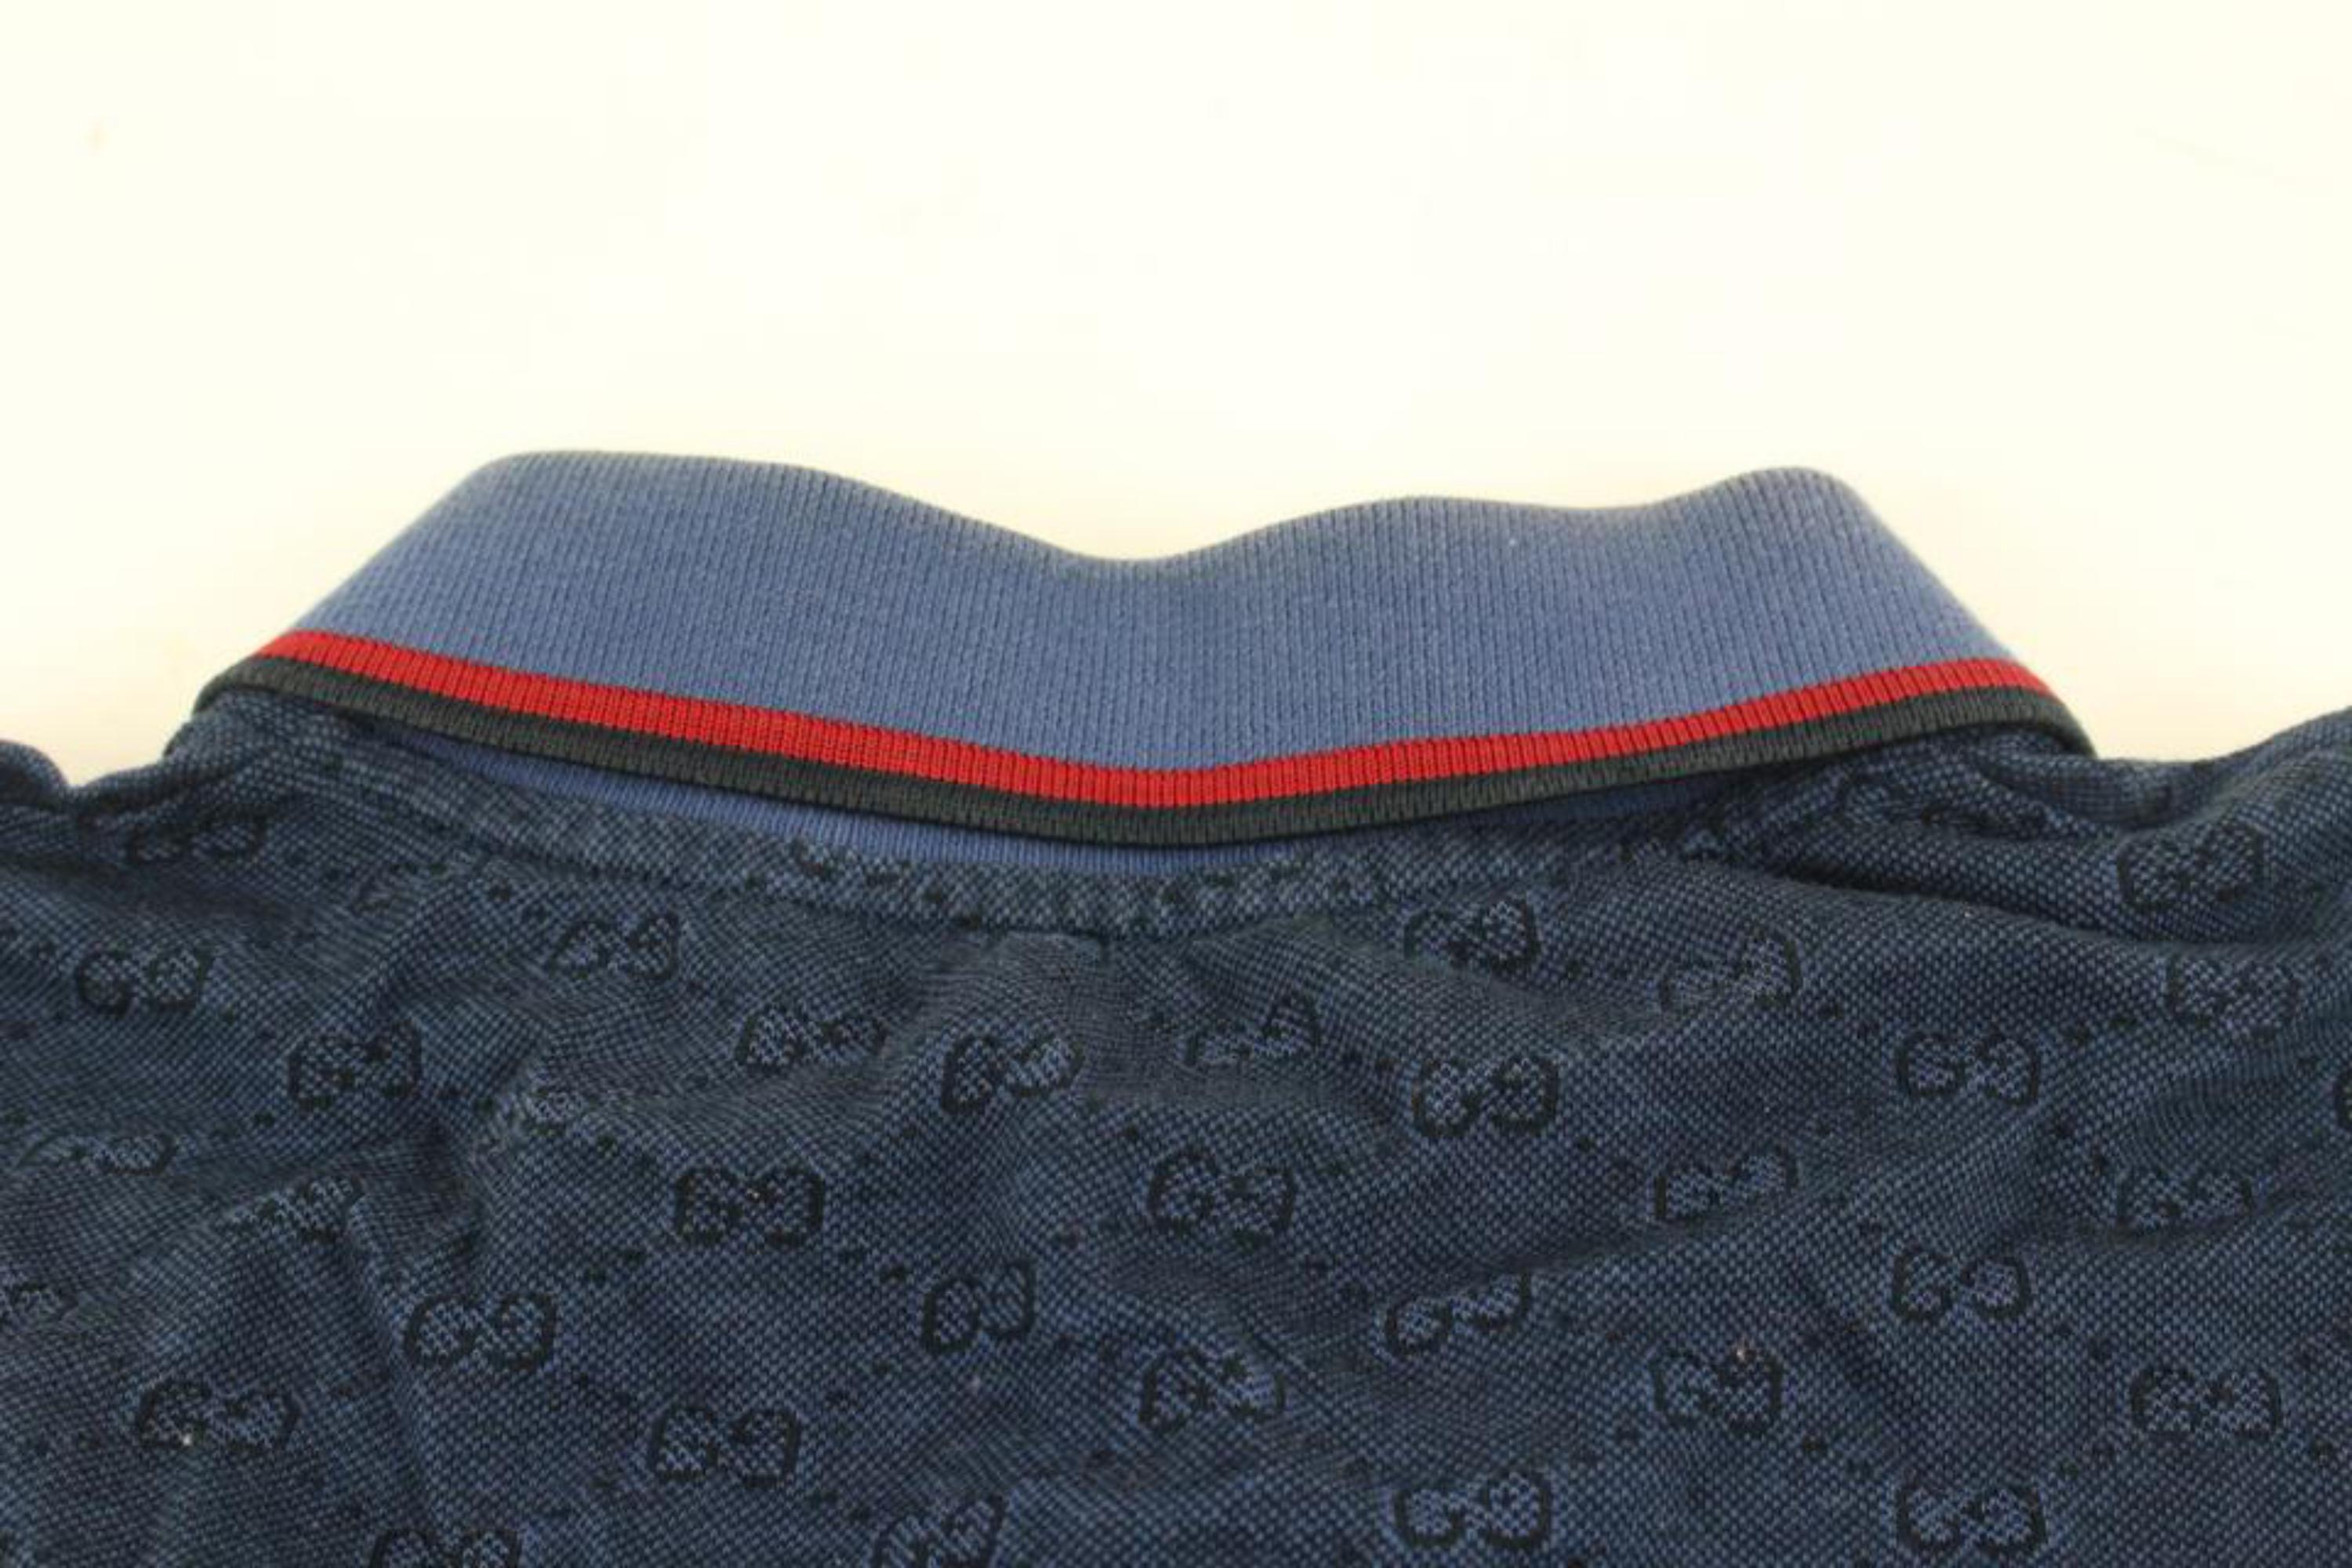 Gucci Men's XXXL Blue Monogram GG Short Sleeve Polo Shirt 0G228 In Good Condition For Sale In Dix hills, NY